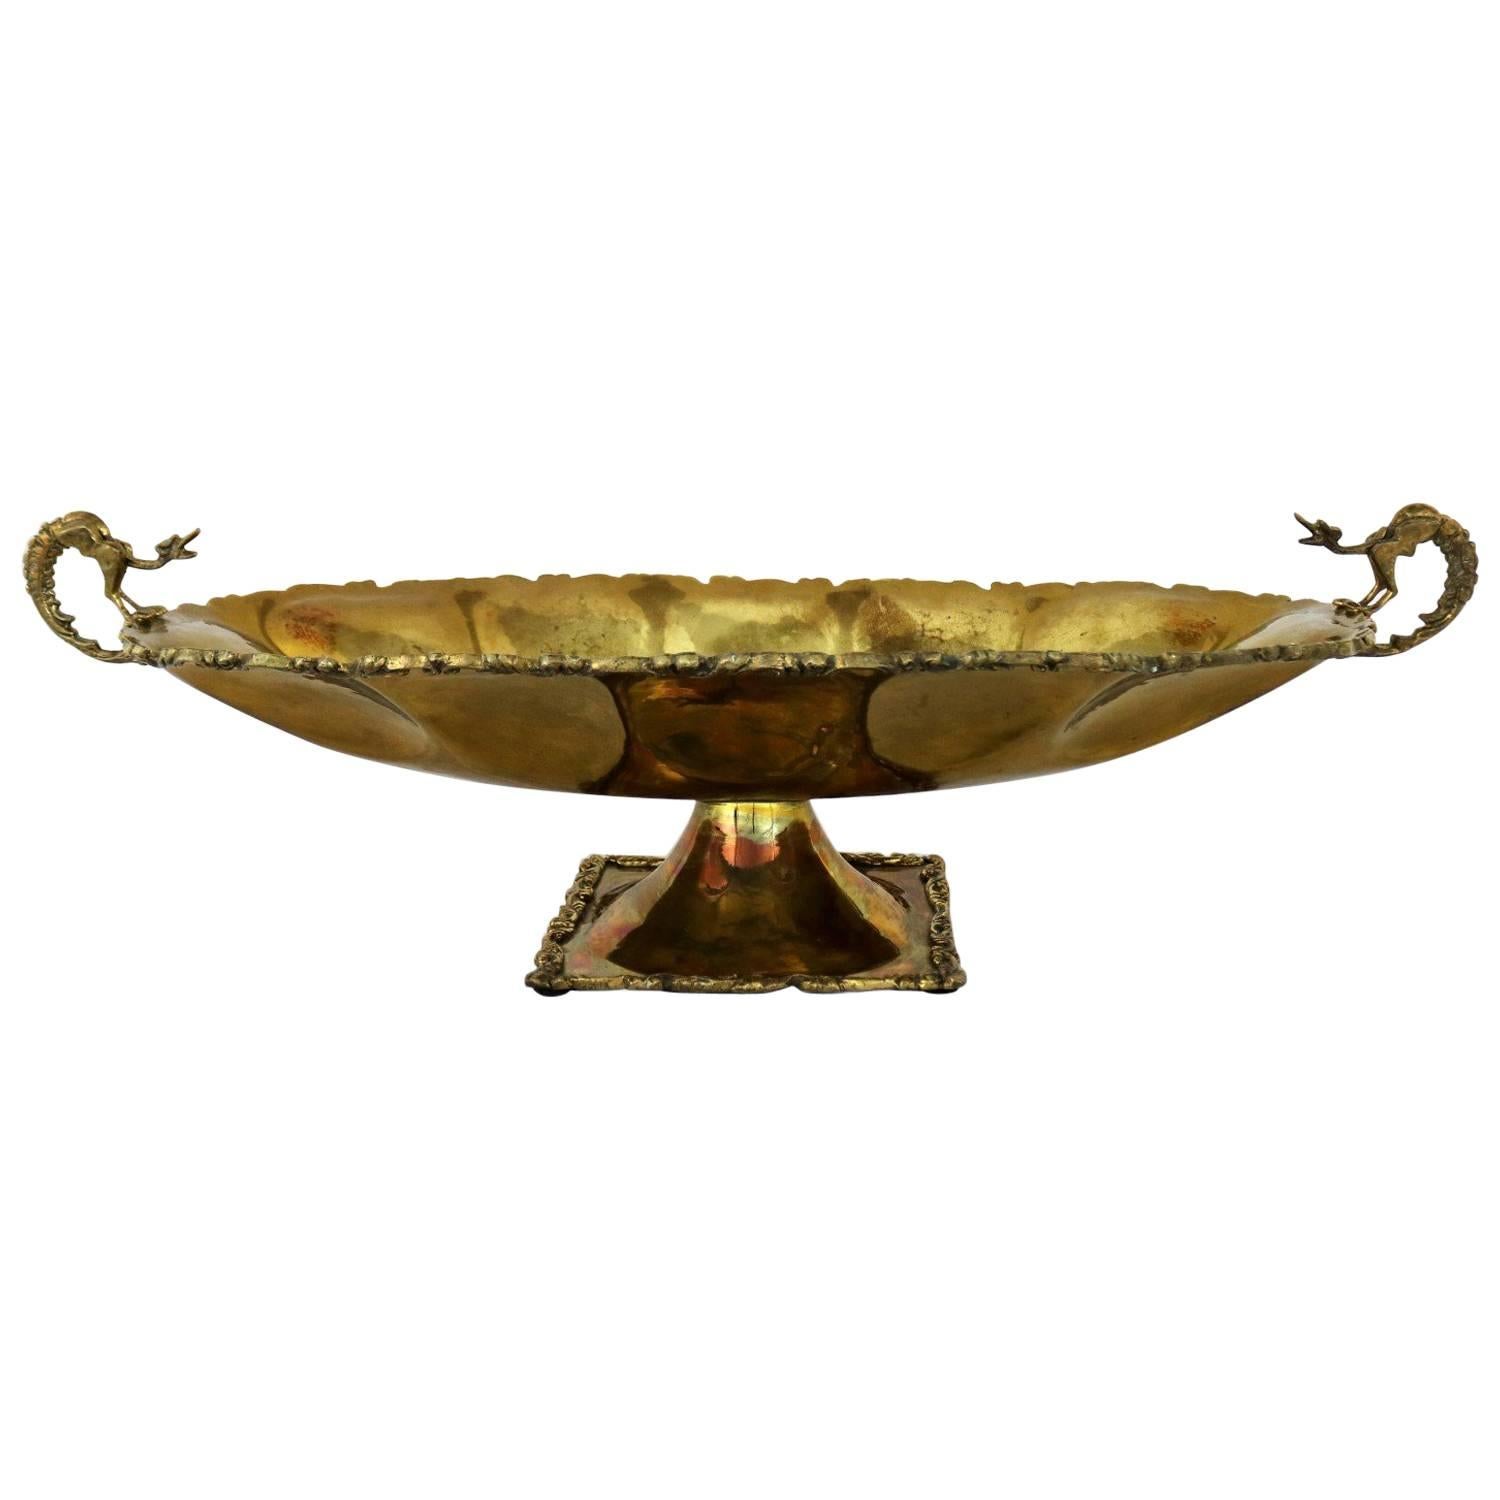 Hand-Wrought Brass Centerpiece Compote Bowl with Cast Details and Dragon Handles